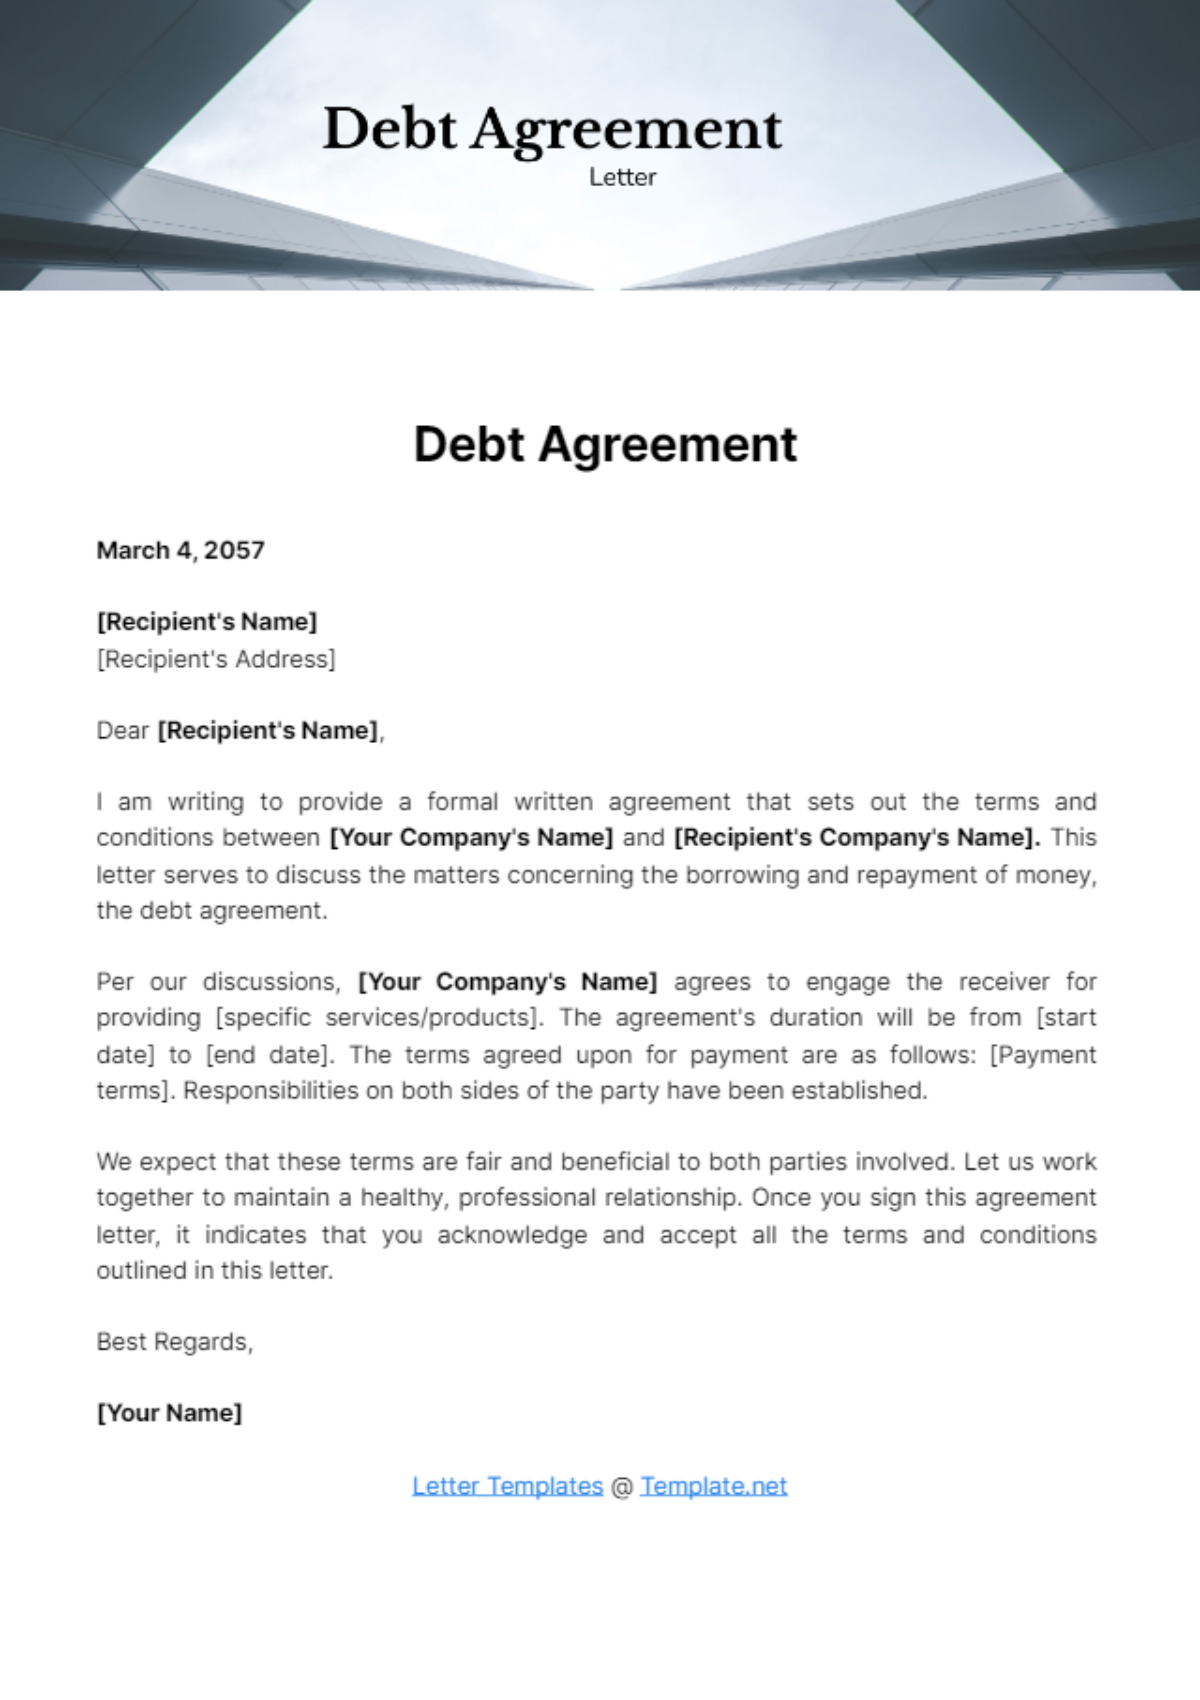 Free Debt Agreement Letter Template